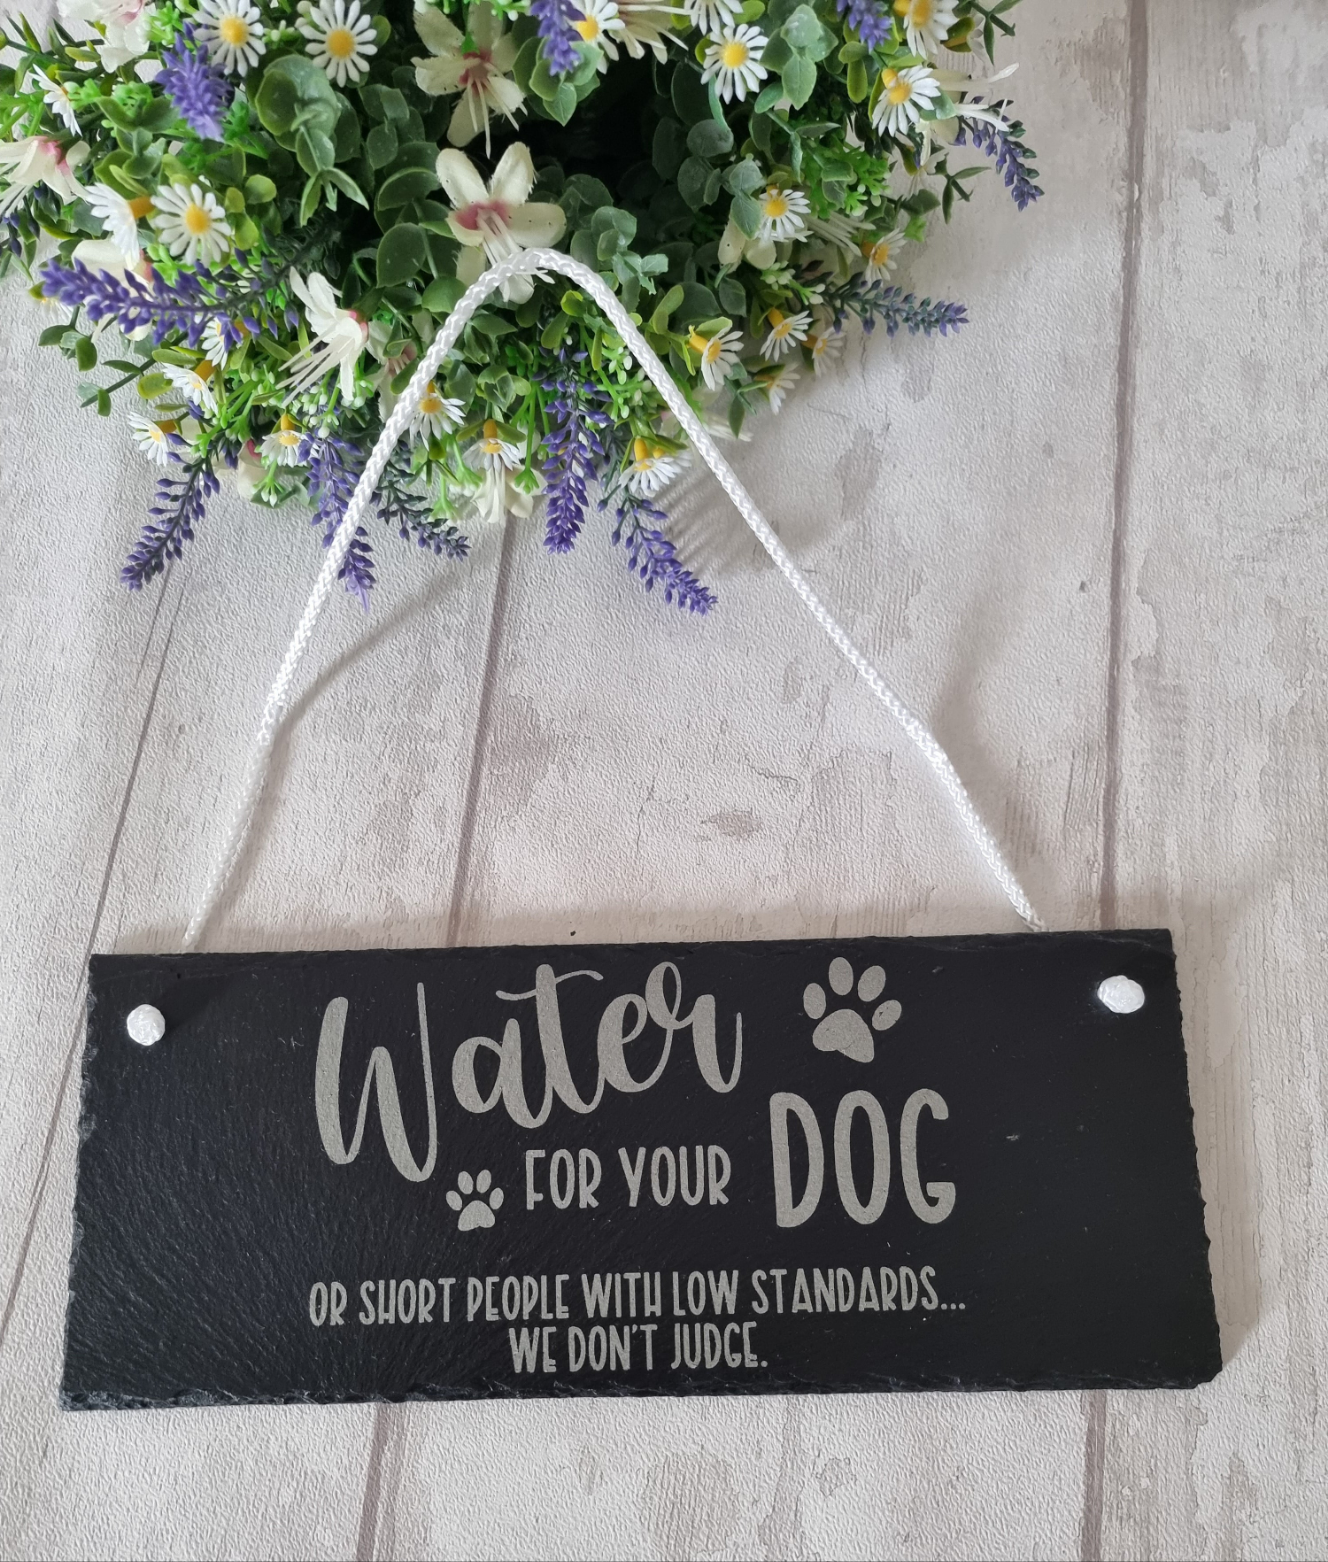 Funny slate sign for dogs.